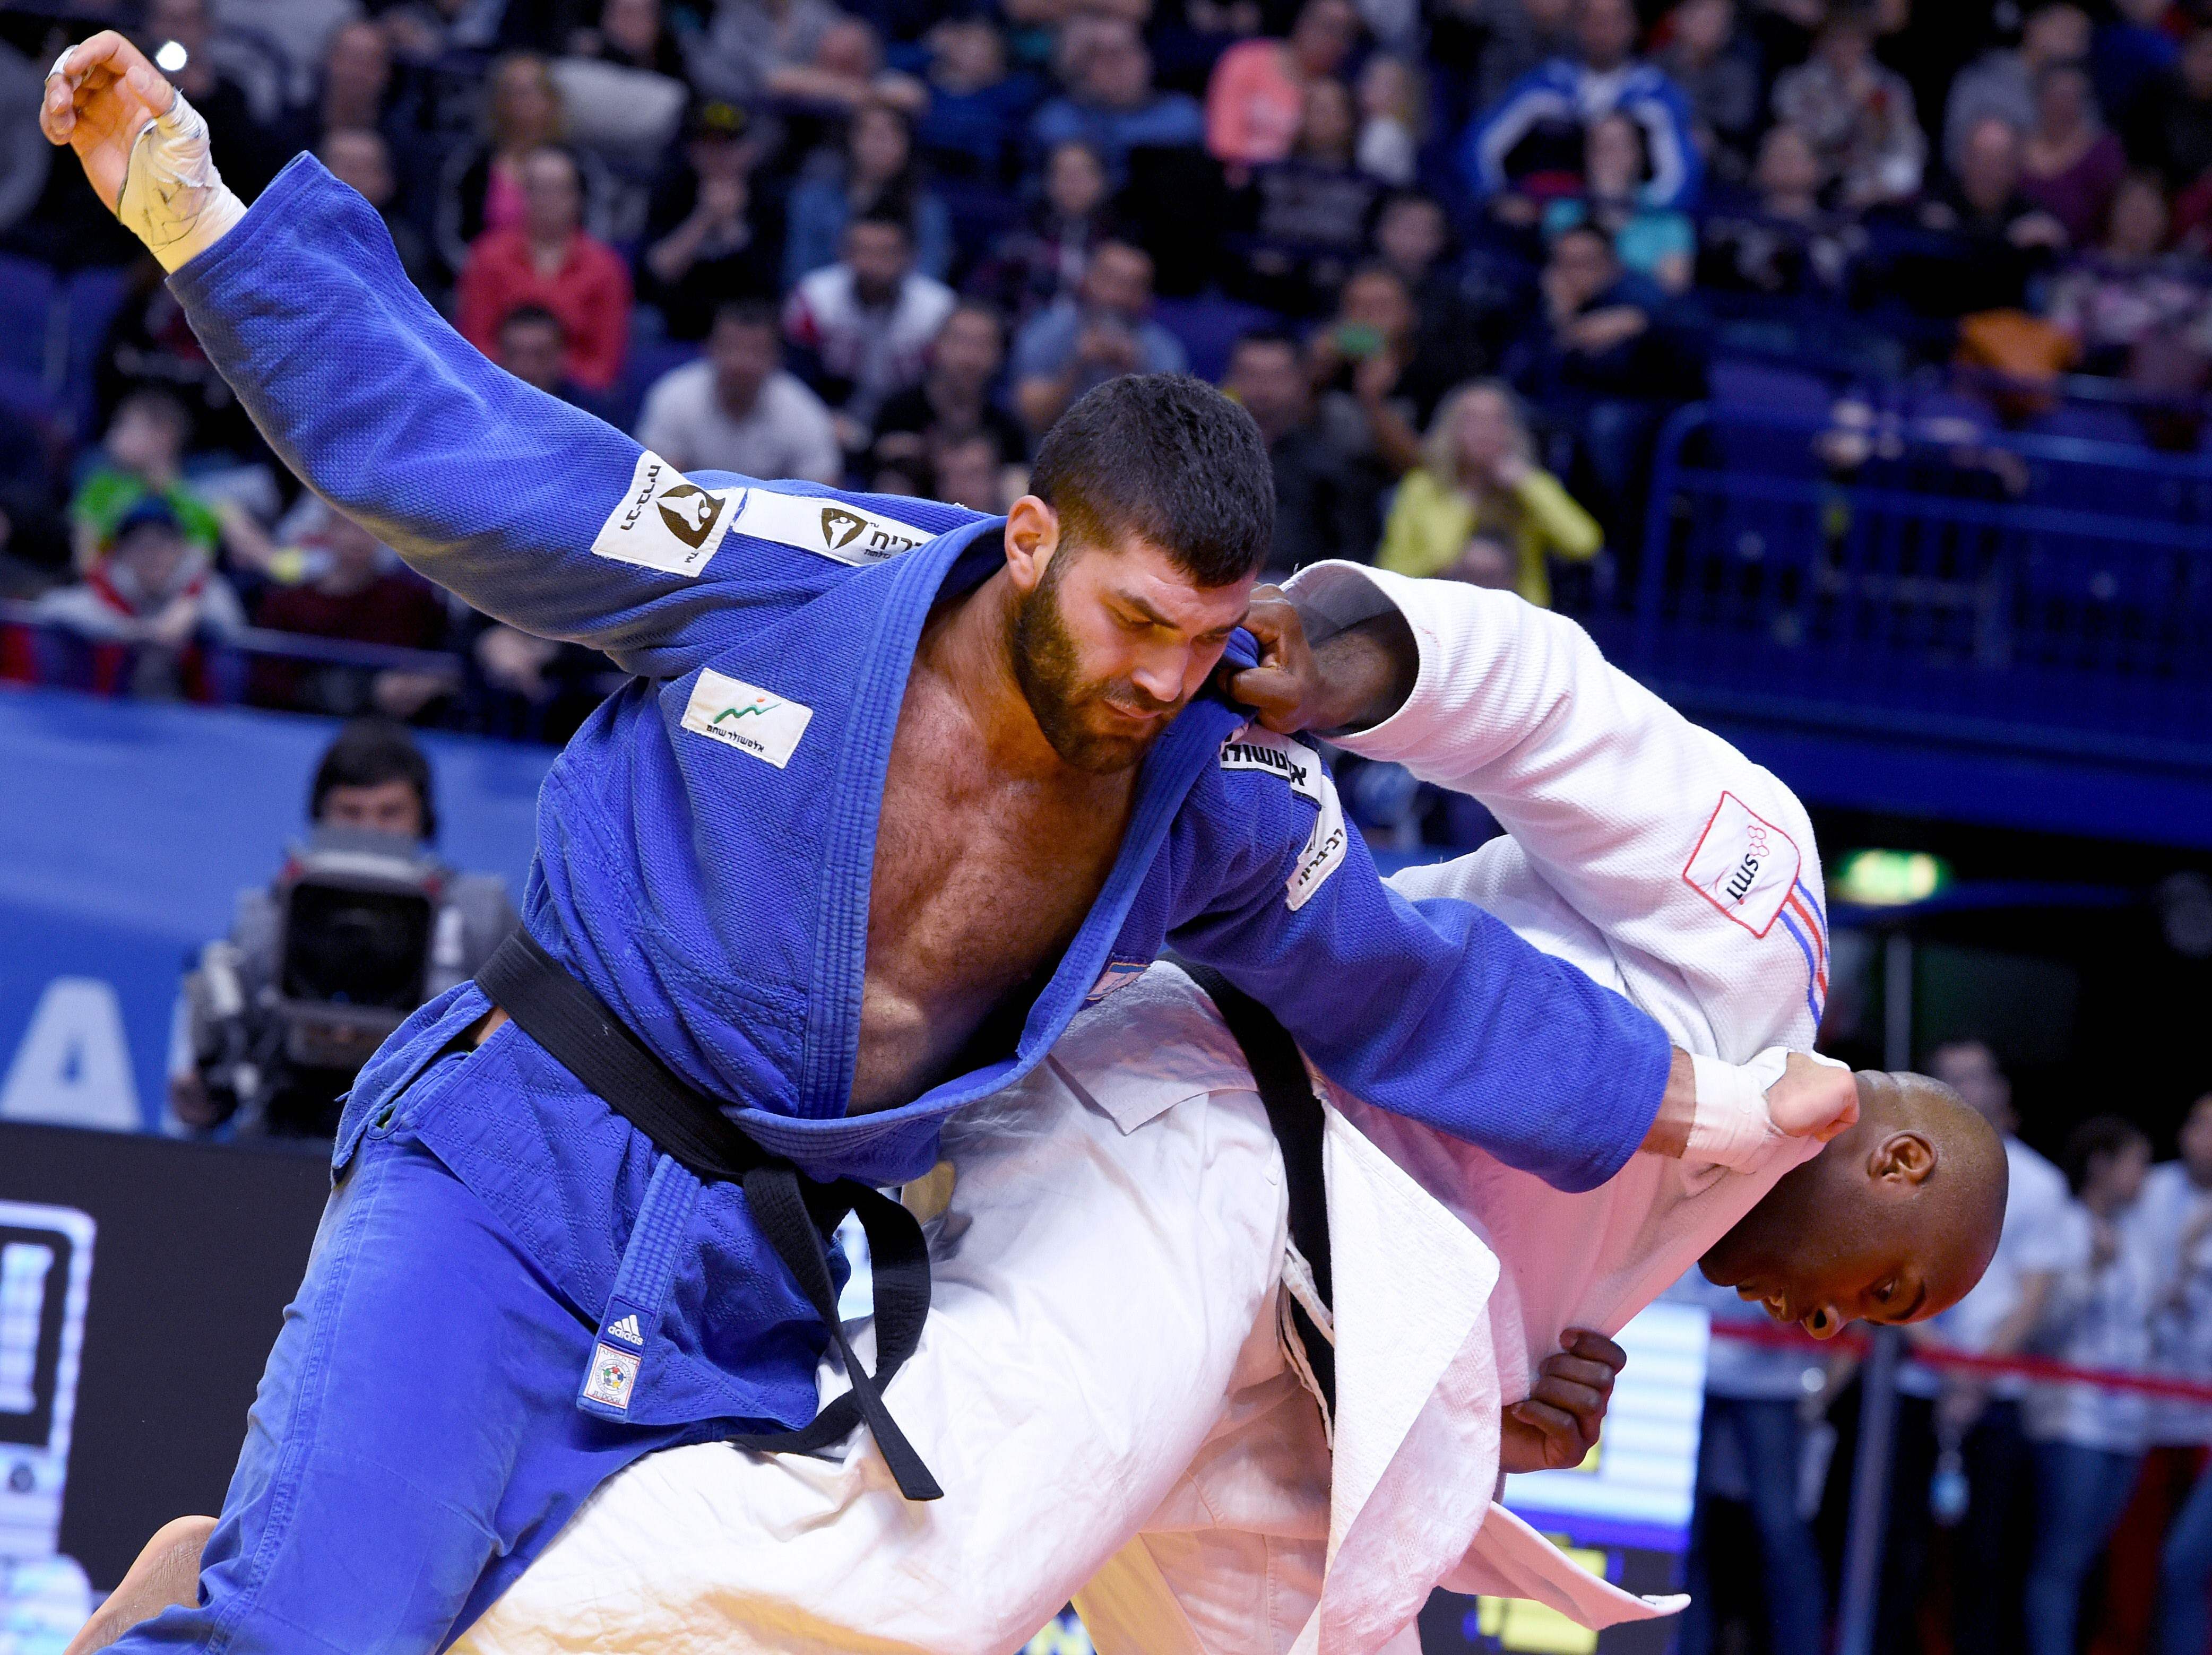 Everything you need to know about judo before the 2016 Olympics | For